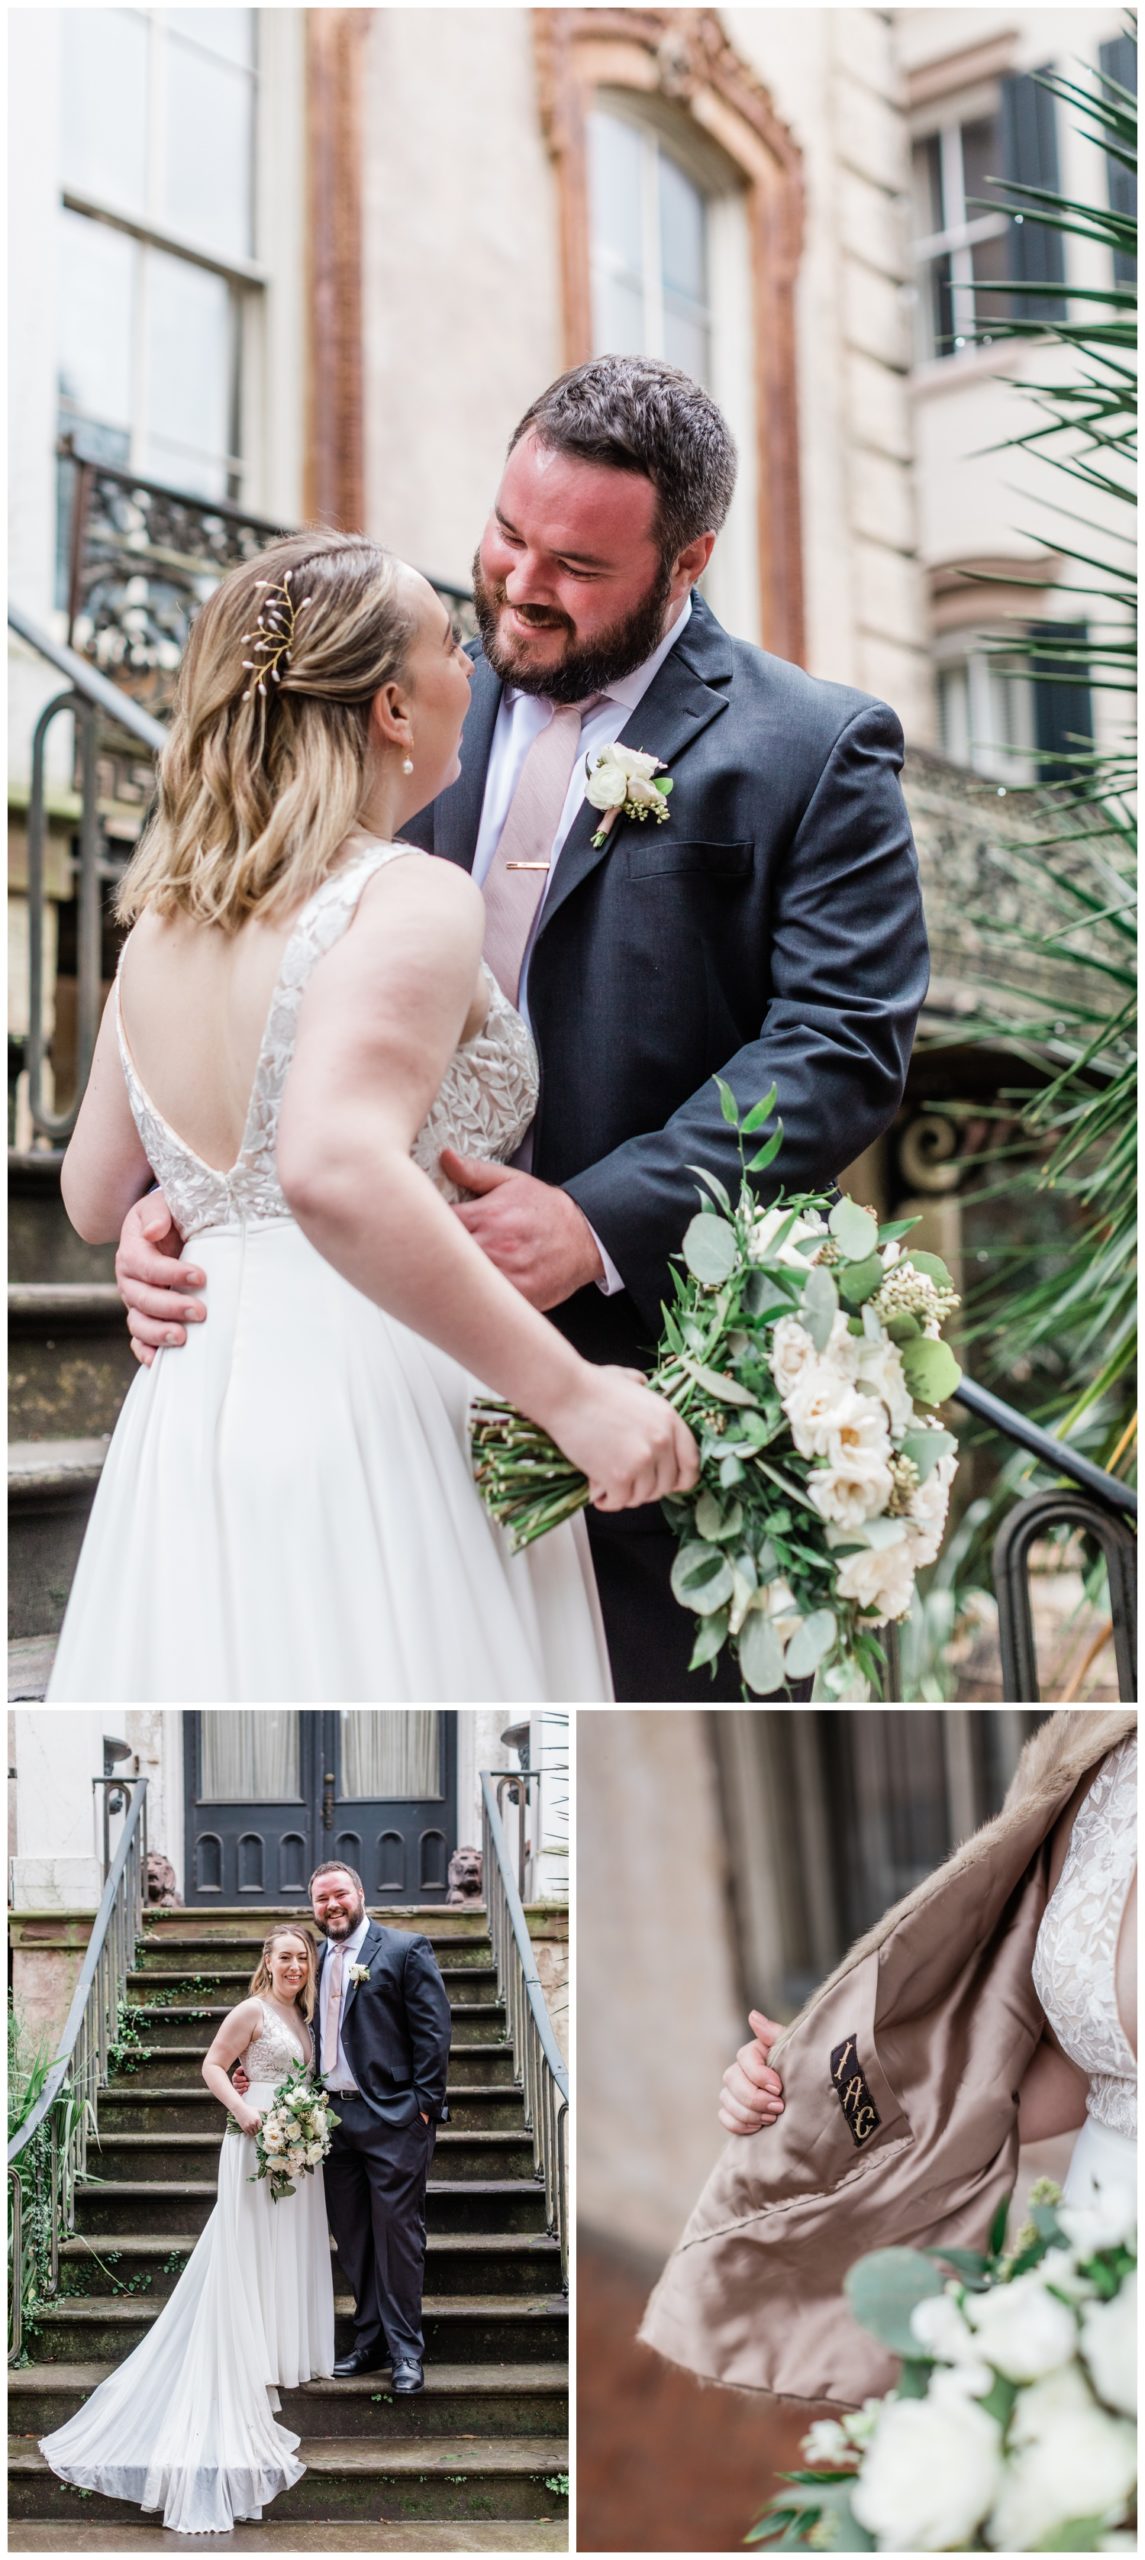 Couples portraits - the savannah elopement package - flowers by ivory and beau